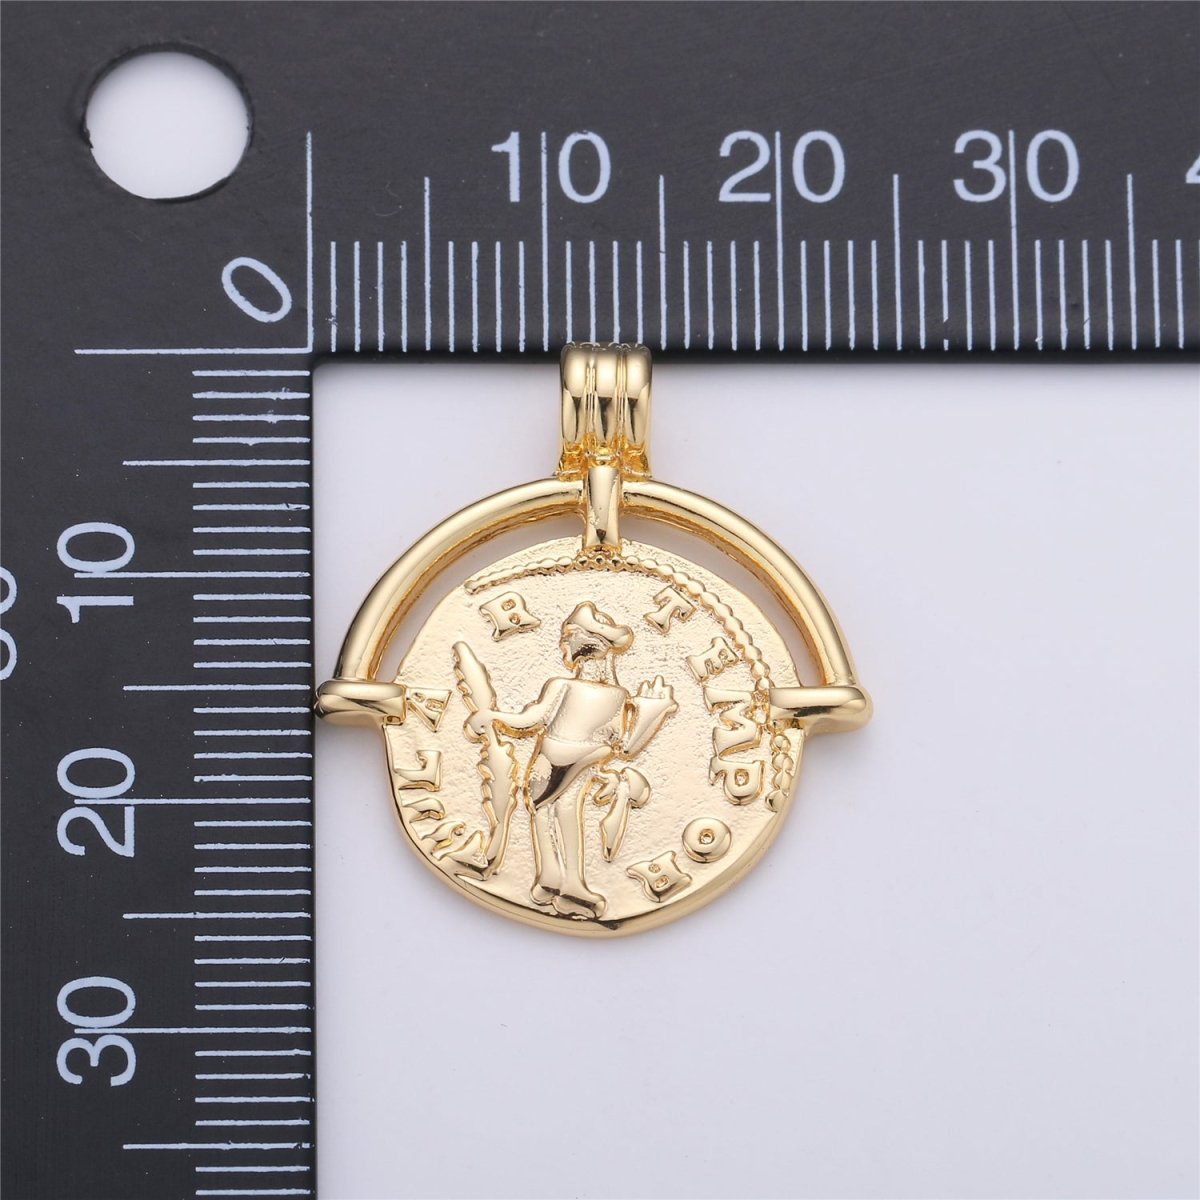 Greek Coin Medallion For Necklace Jewelry Making, 14K Gold Filled For Necklace Charm Bracelet Supply Component C-593 - DLUXCA